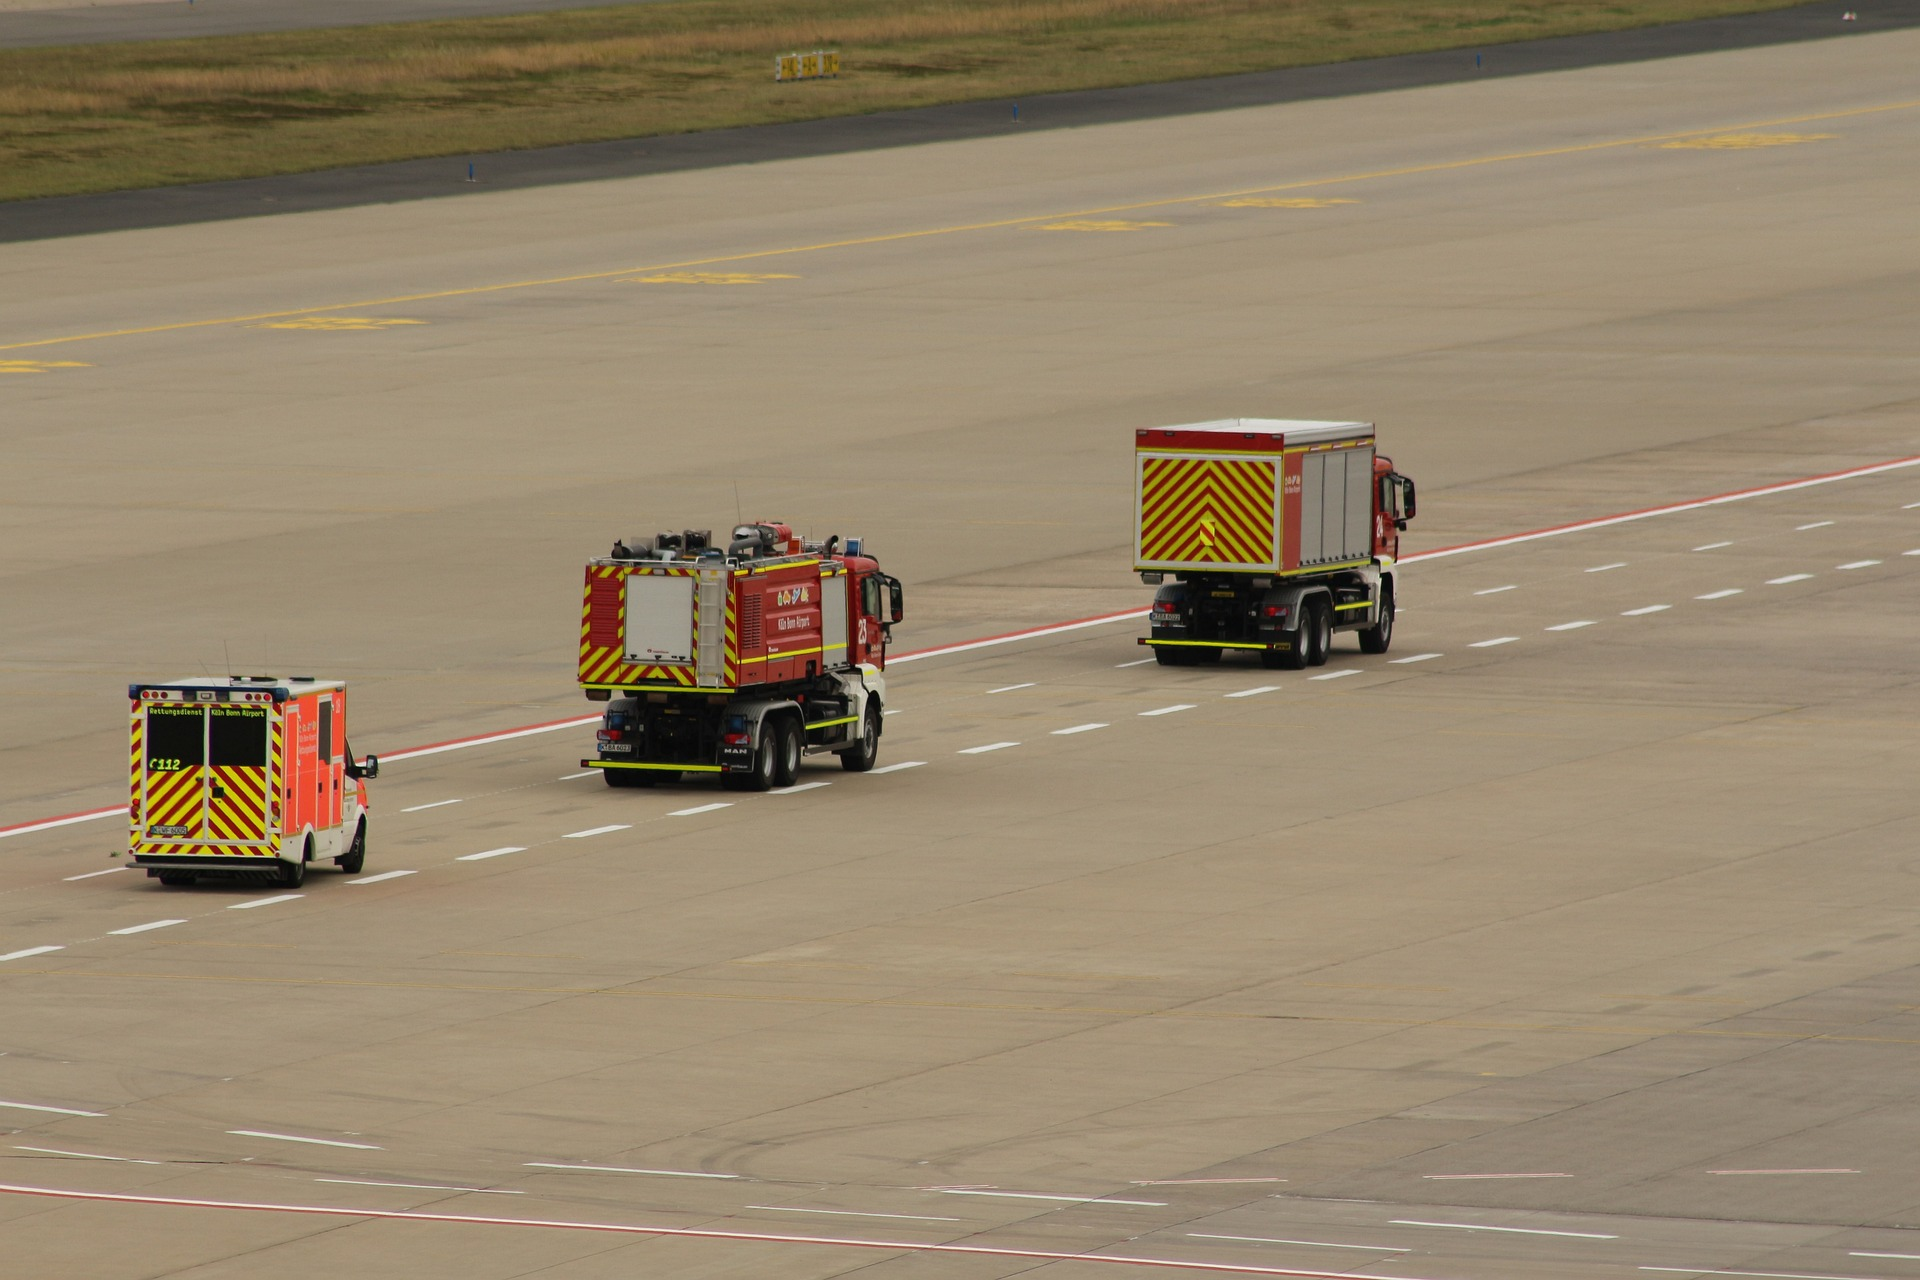 Crisis and disaster response team driving down an airport runway as a part of disaster management cycle training.